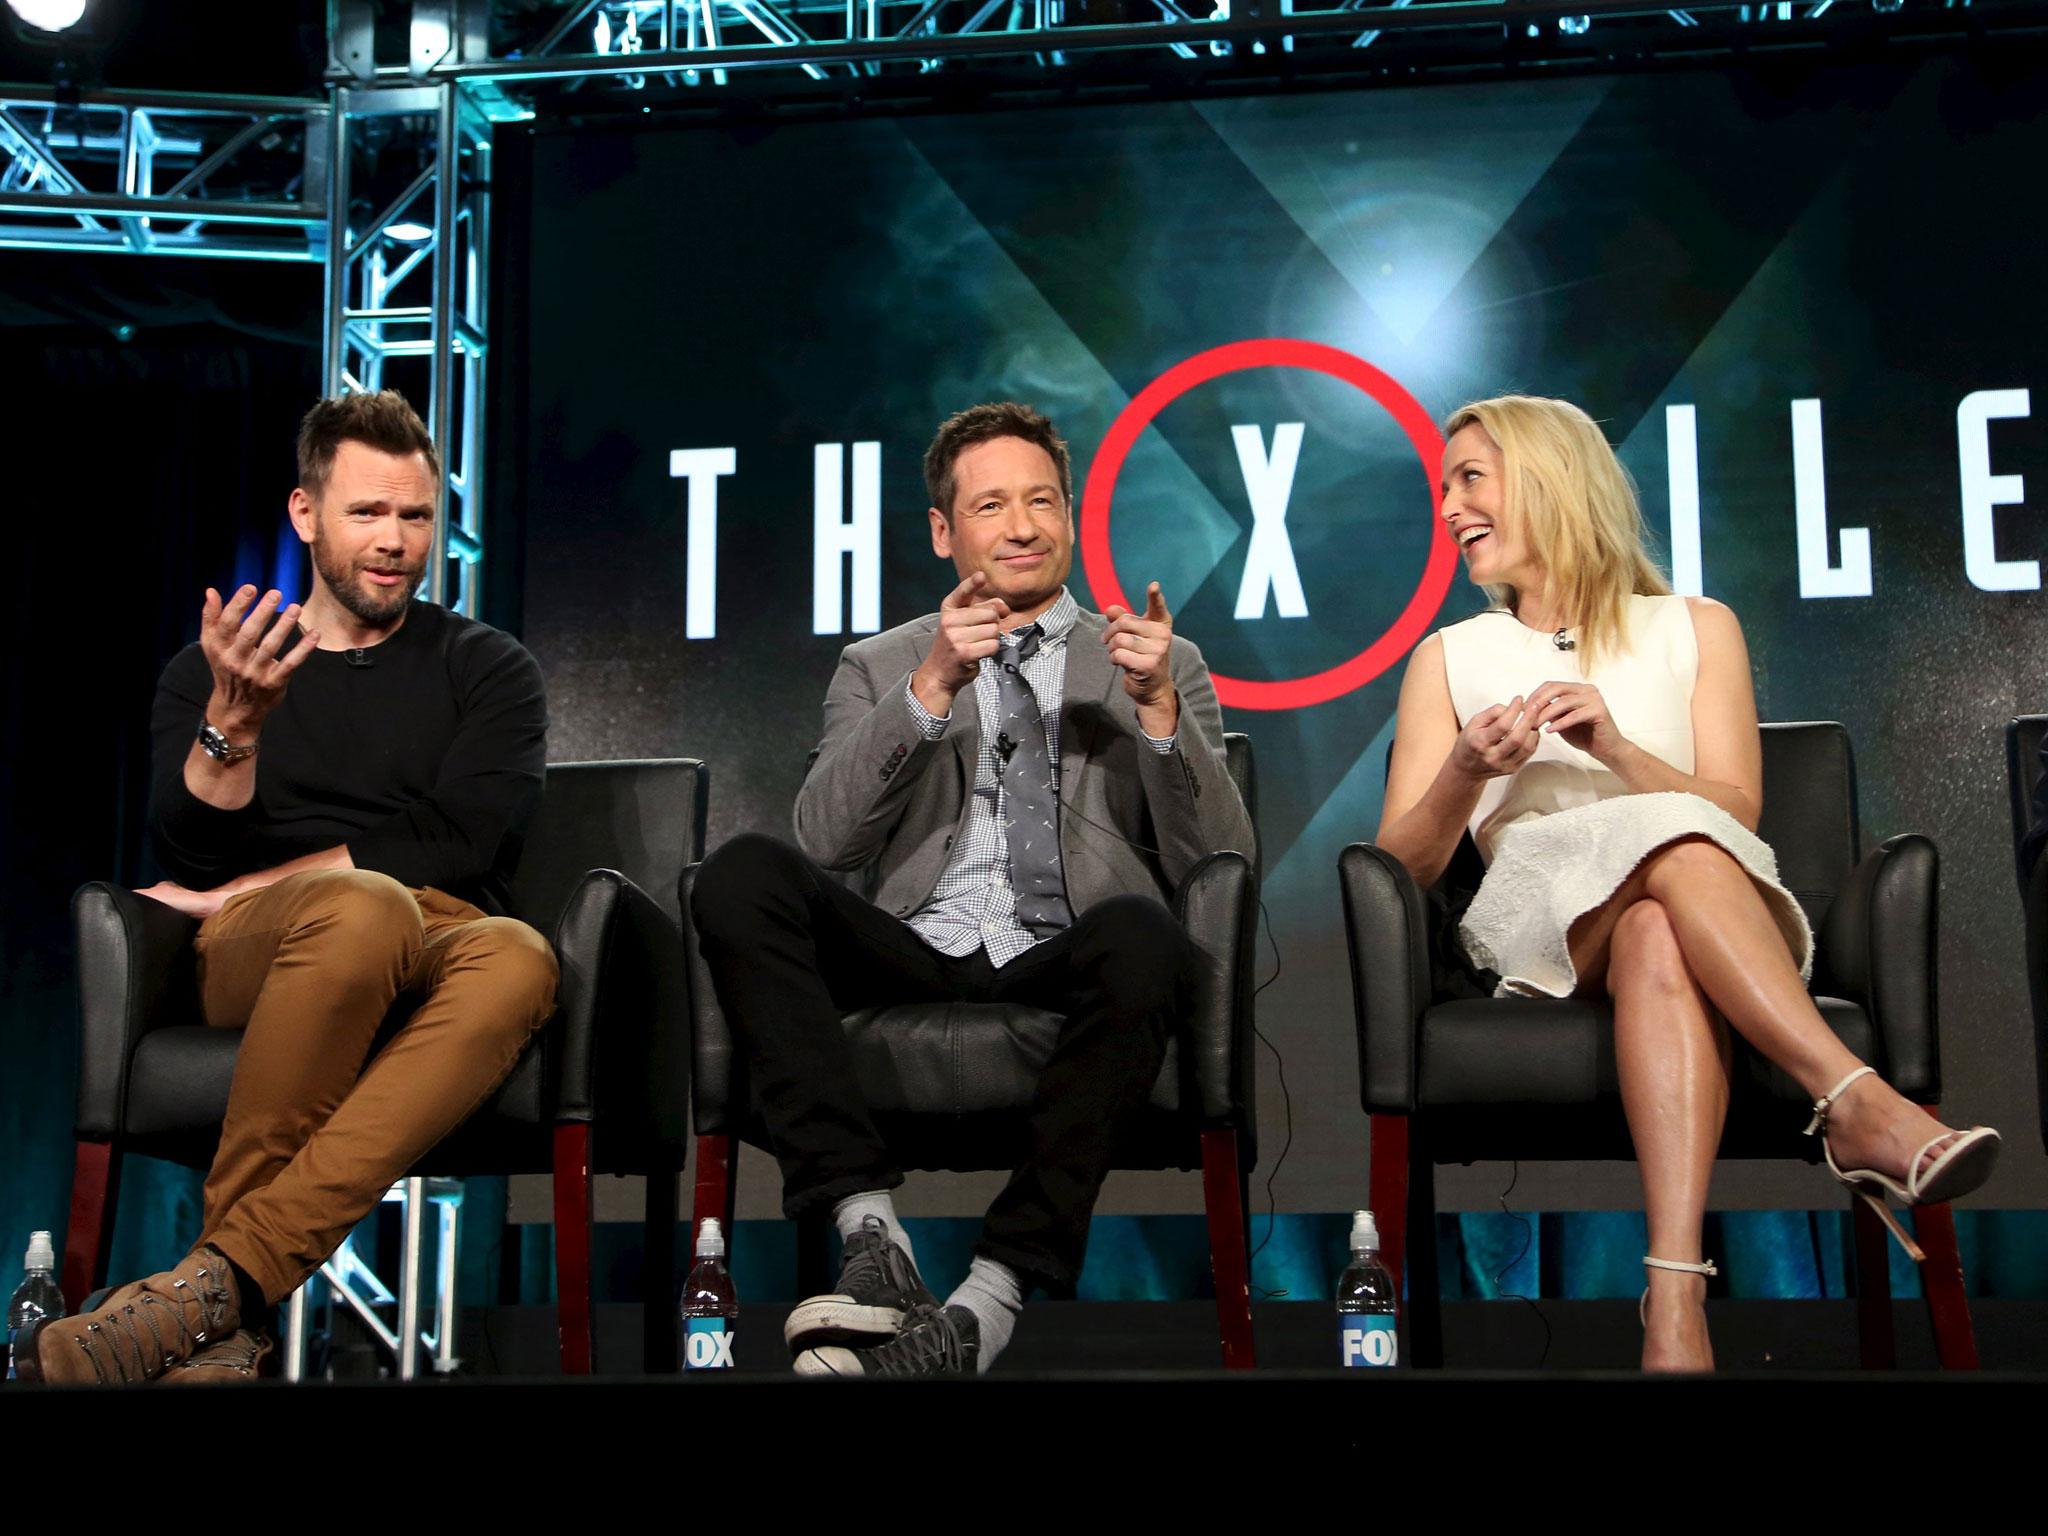 The relationship between David Duchovny (C) and Gillian Anderson's (R) characters formed the show's basis